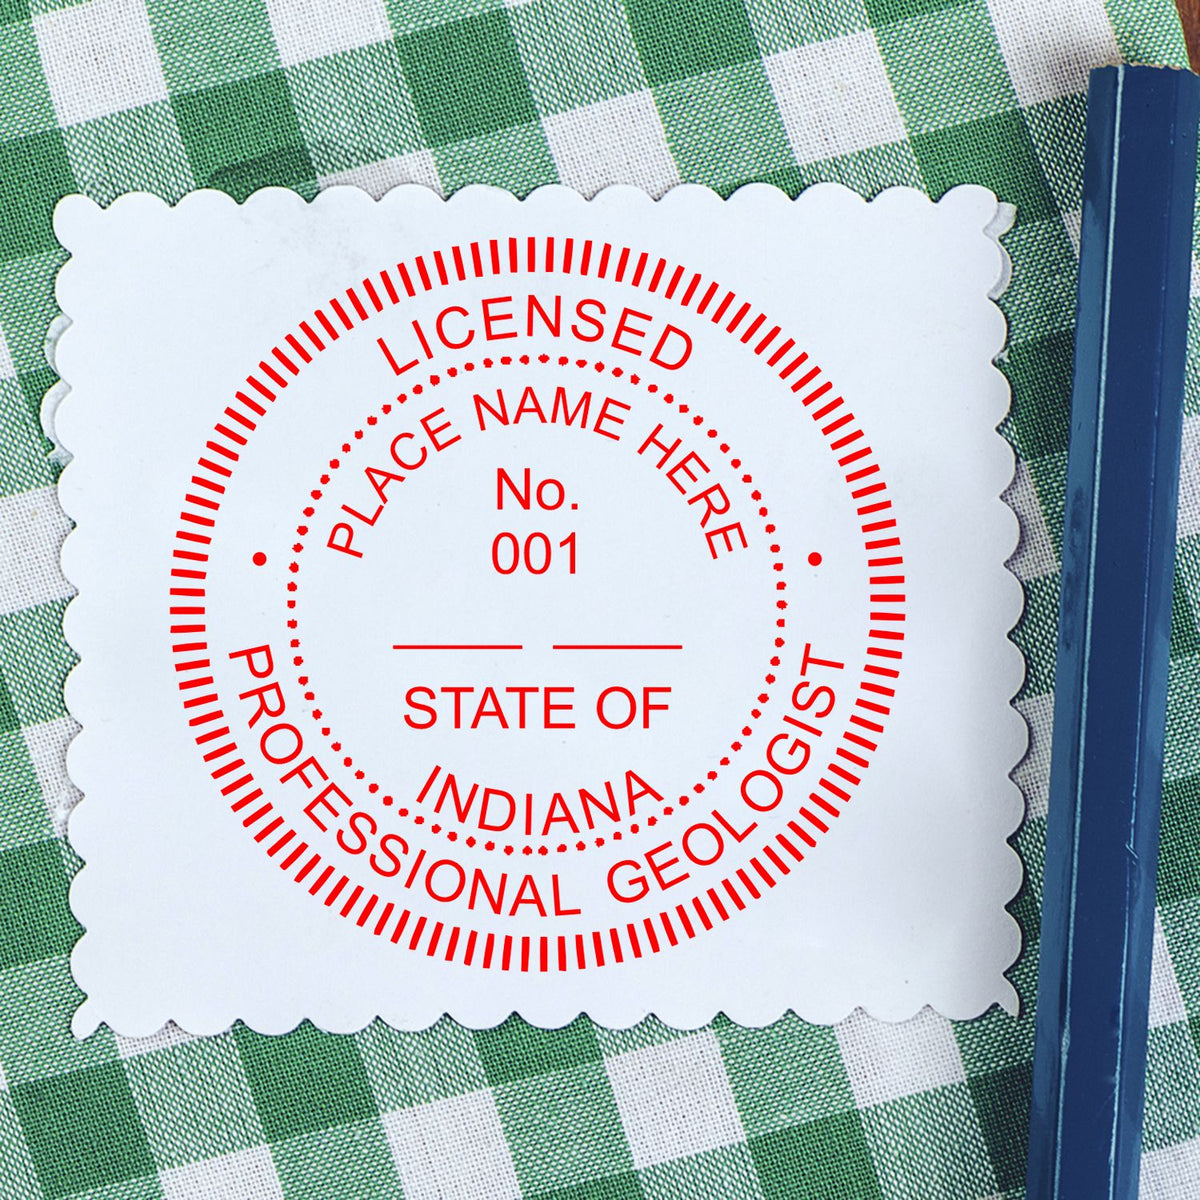 The Digital Indiana Geologist Stamp, Electronic Seal for Indiana Geologist stamp impression comes to life with a crisp, detailed image stamped on paper - showcasing true professional quality.